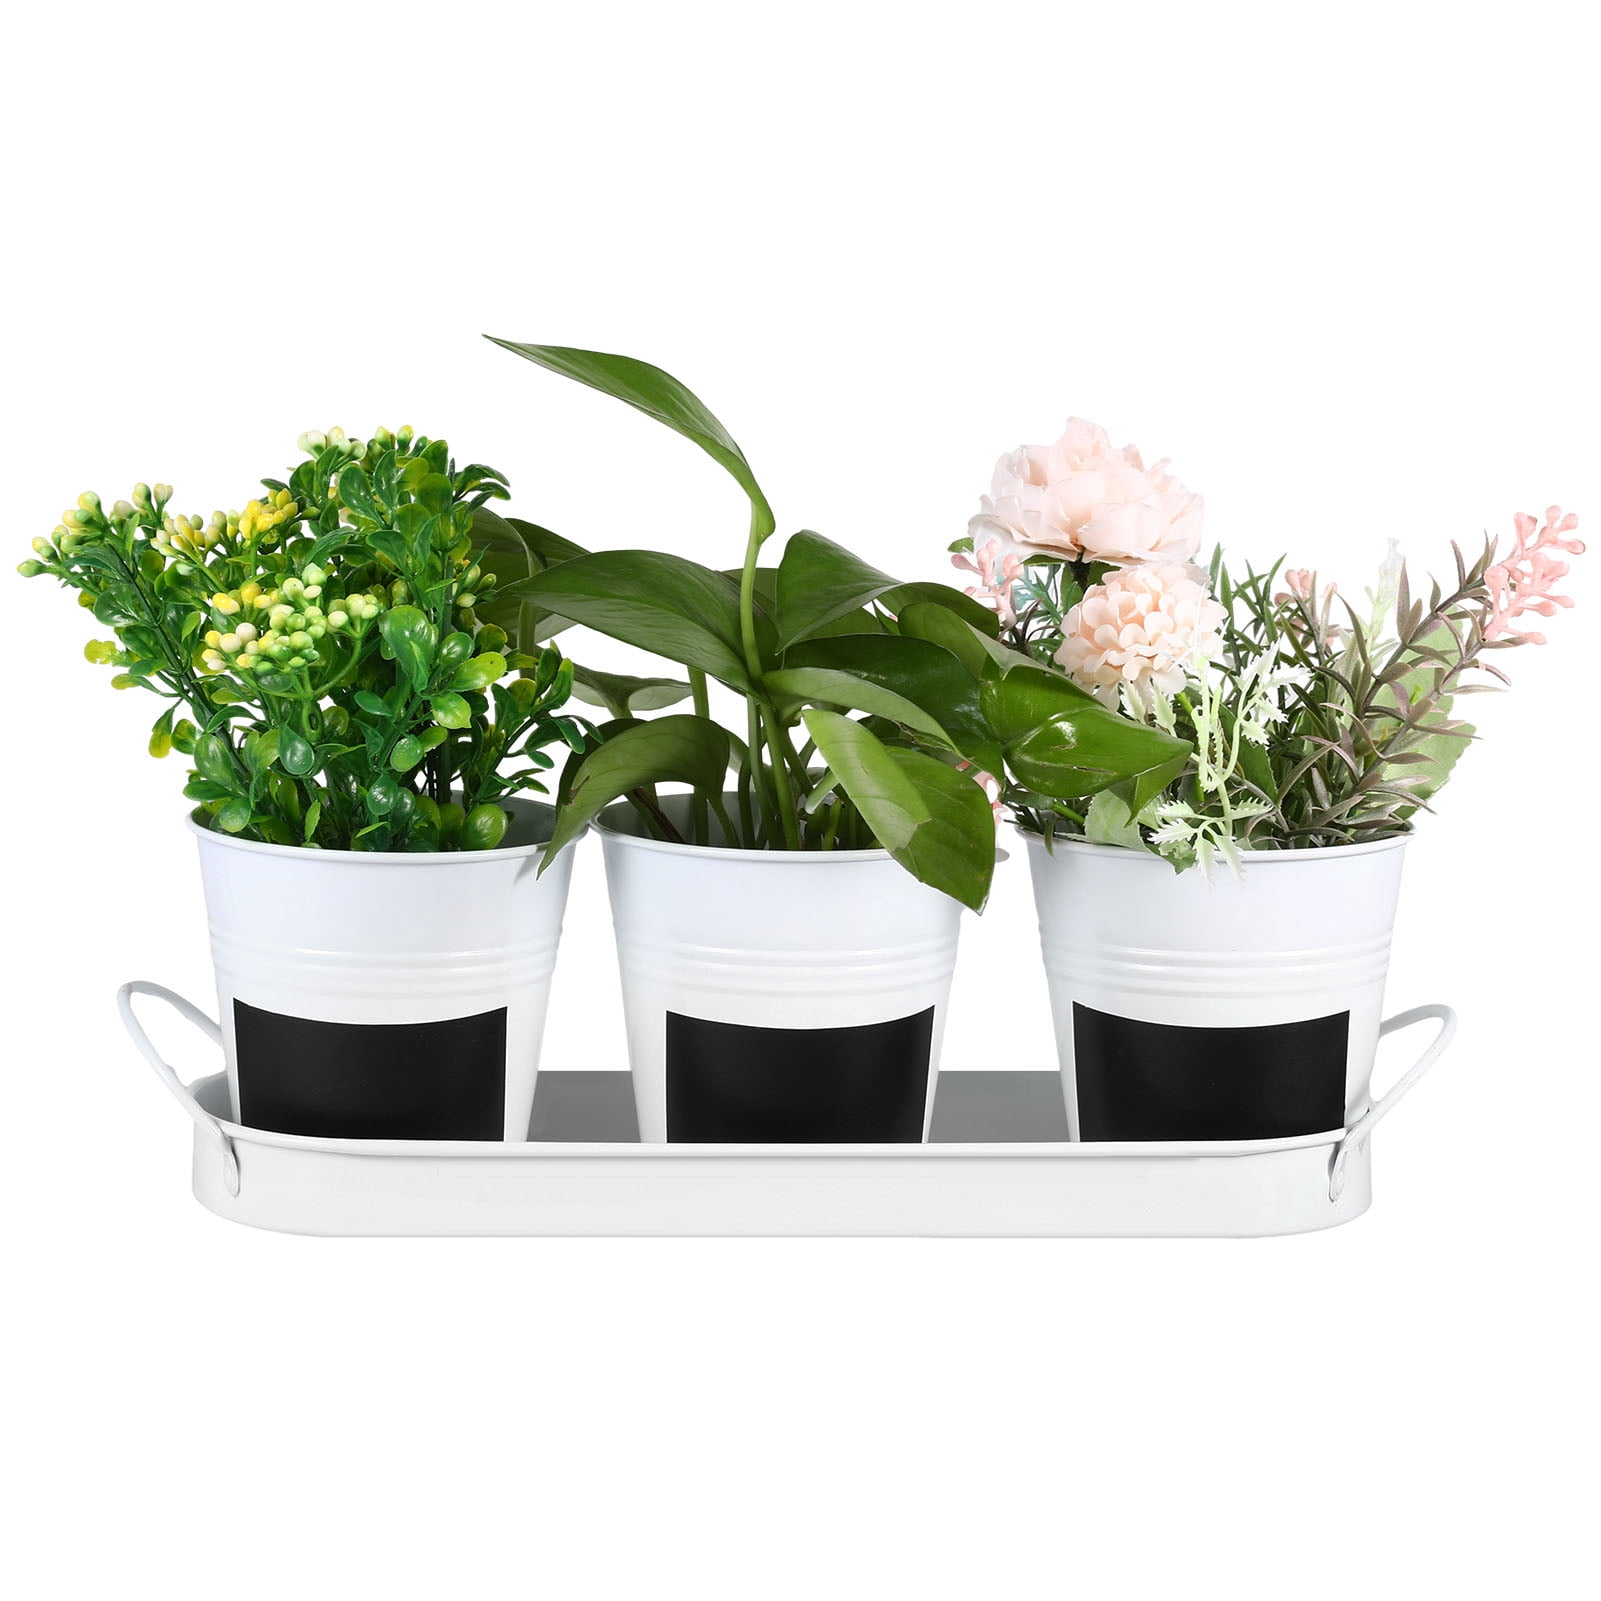 3 Pieces Metal Herb Potted Planter Tray Set Included 96 Piece